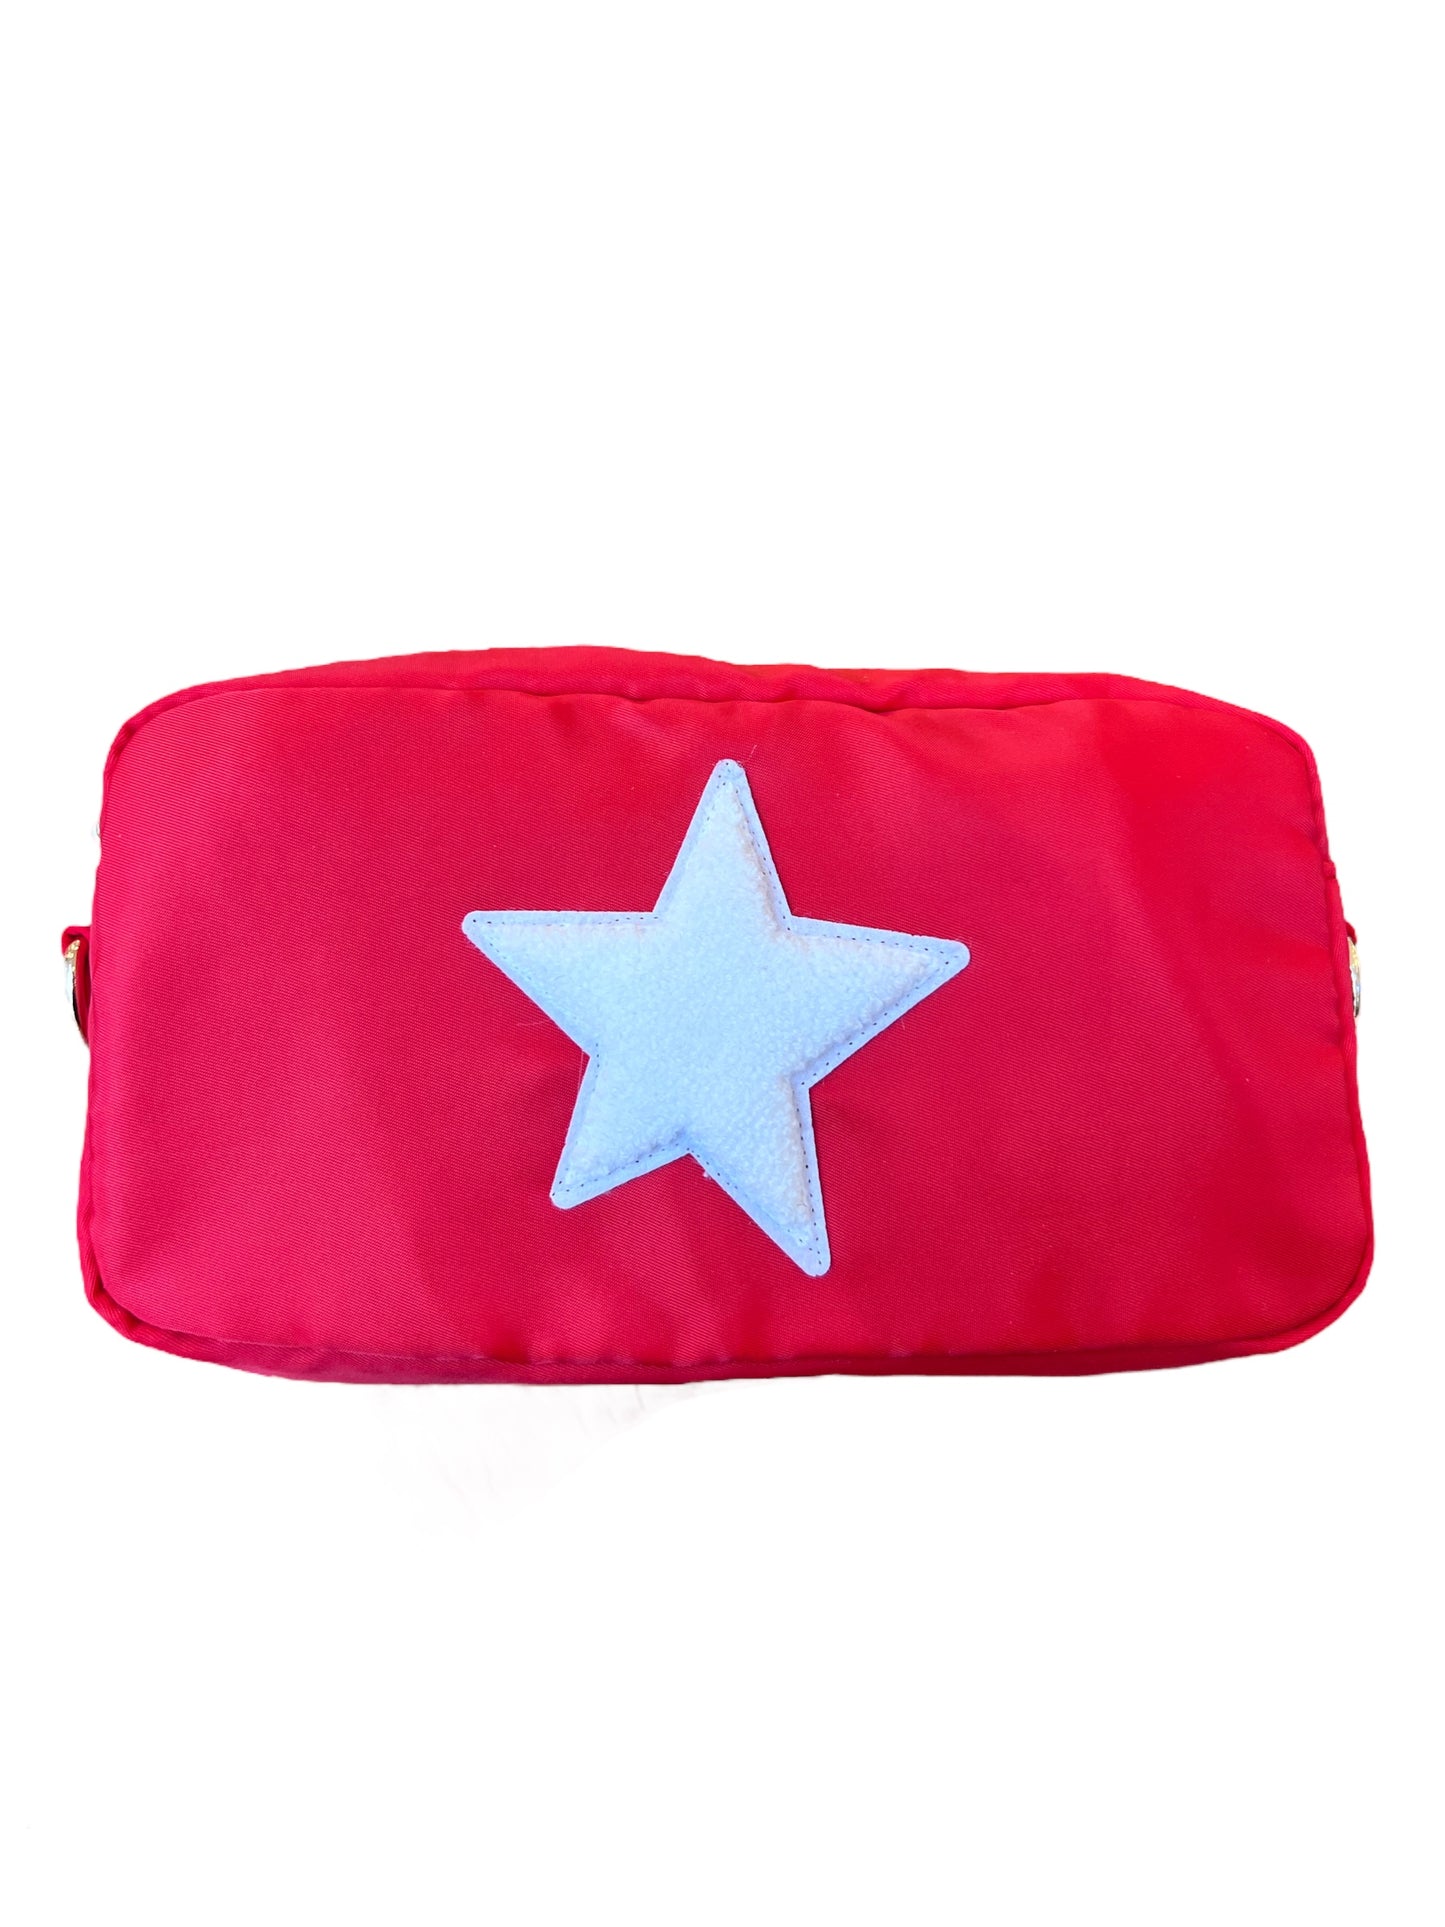 Special Edition Star Bag: Red